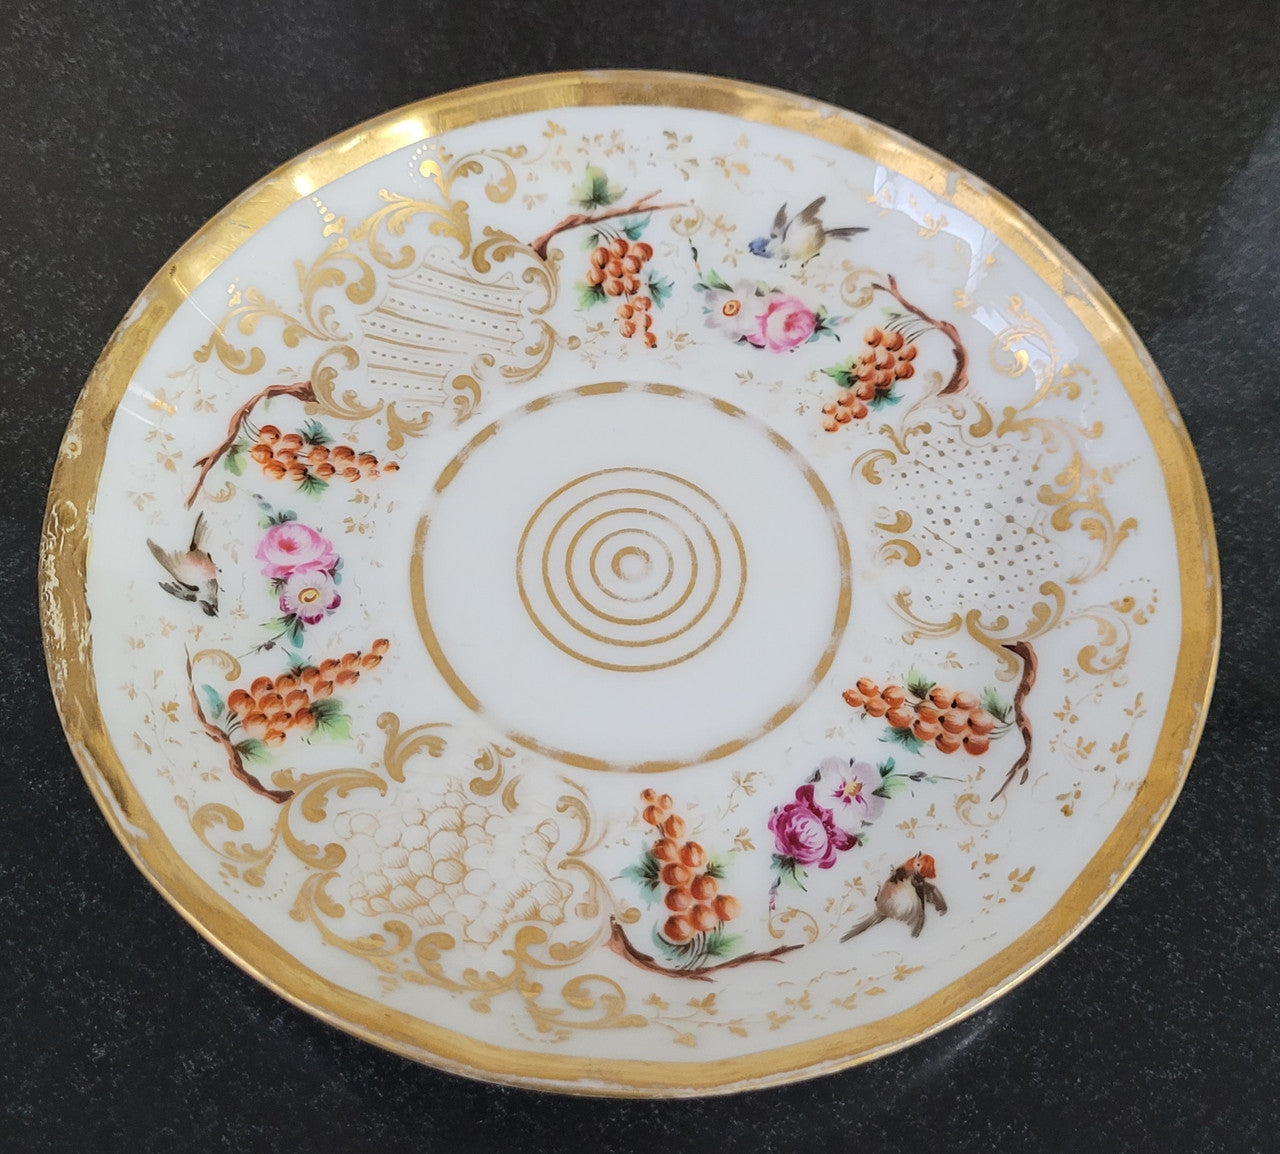 “Old Paris Porcelain” large cup and saucer, beautifully decorated with birds, grapes, floral sprays and heavily gilded. Dated to base 1835. In good original condition please view photos as they help form part of description.